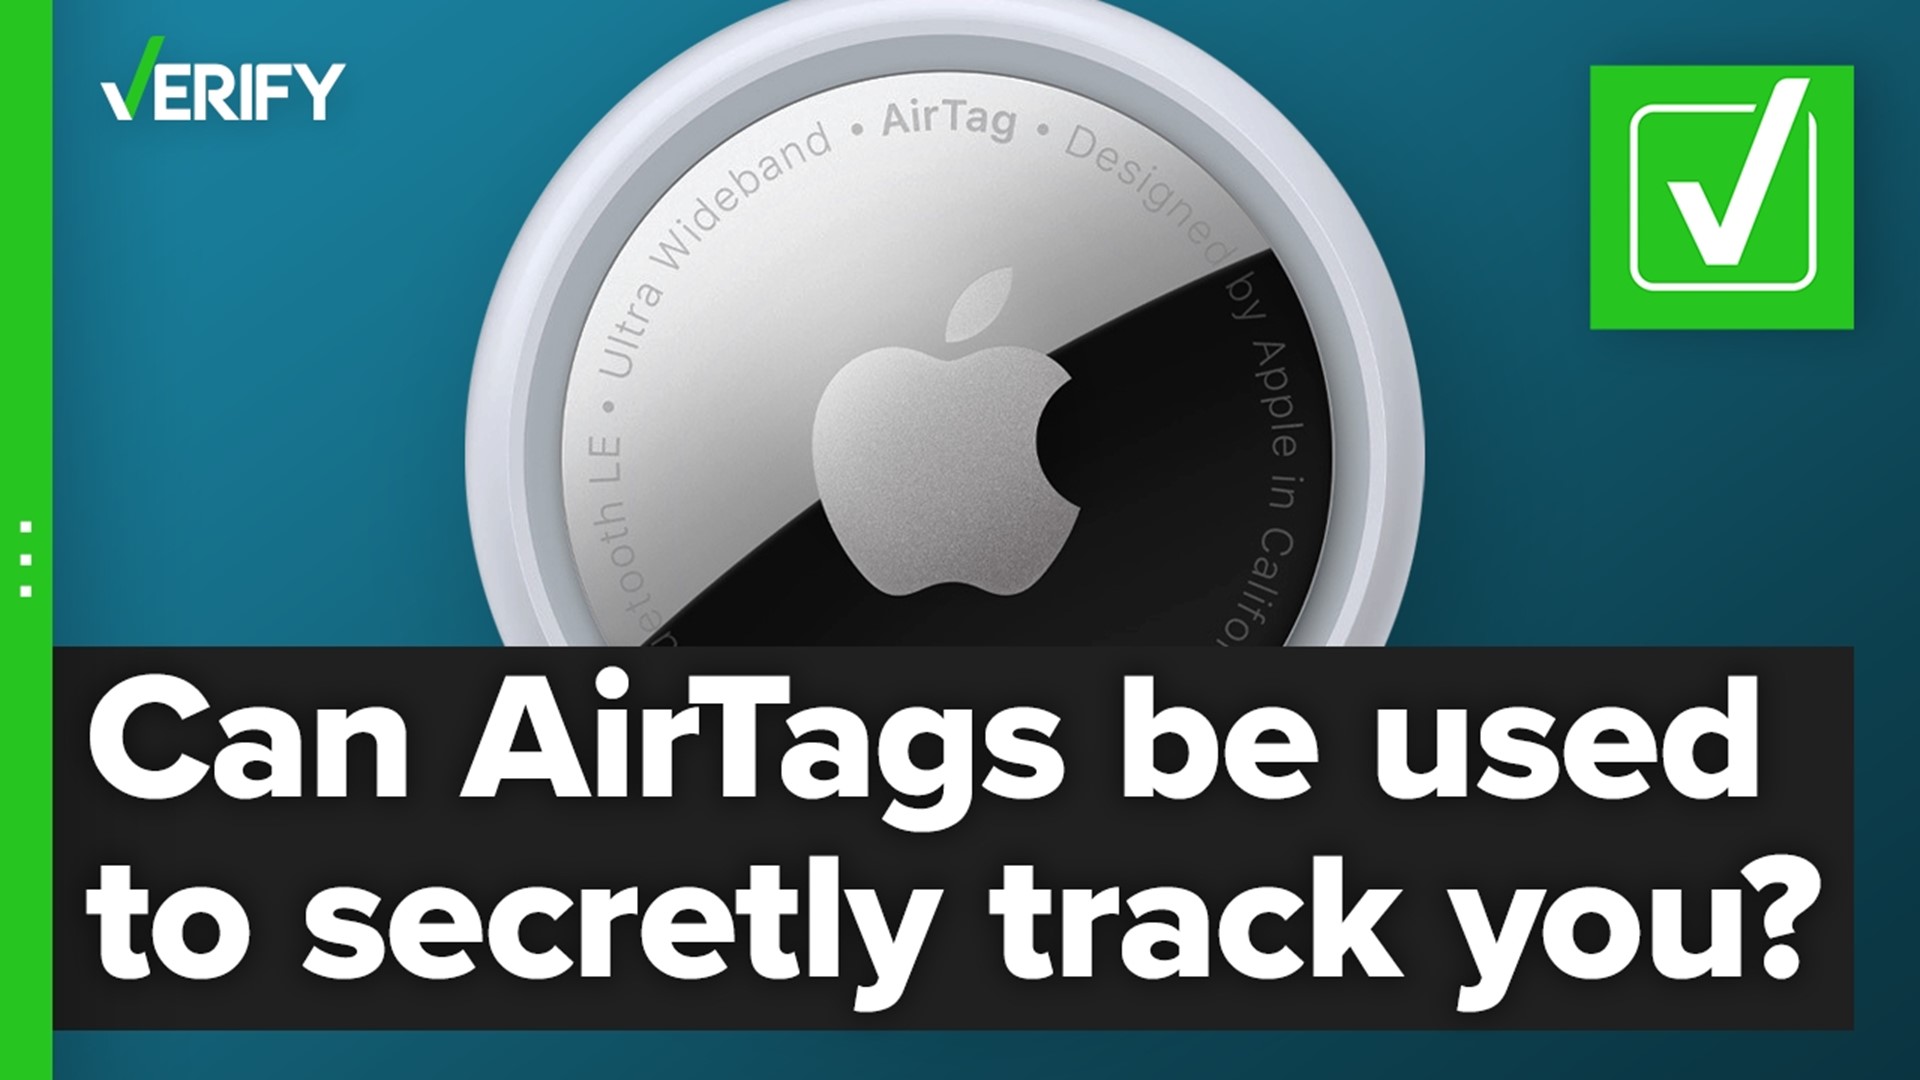 Apple launched its AirTag product, a small chip that can help people track lost items, in 2021. But it’s already being used to track people without their knowledge.